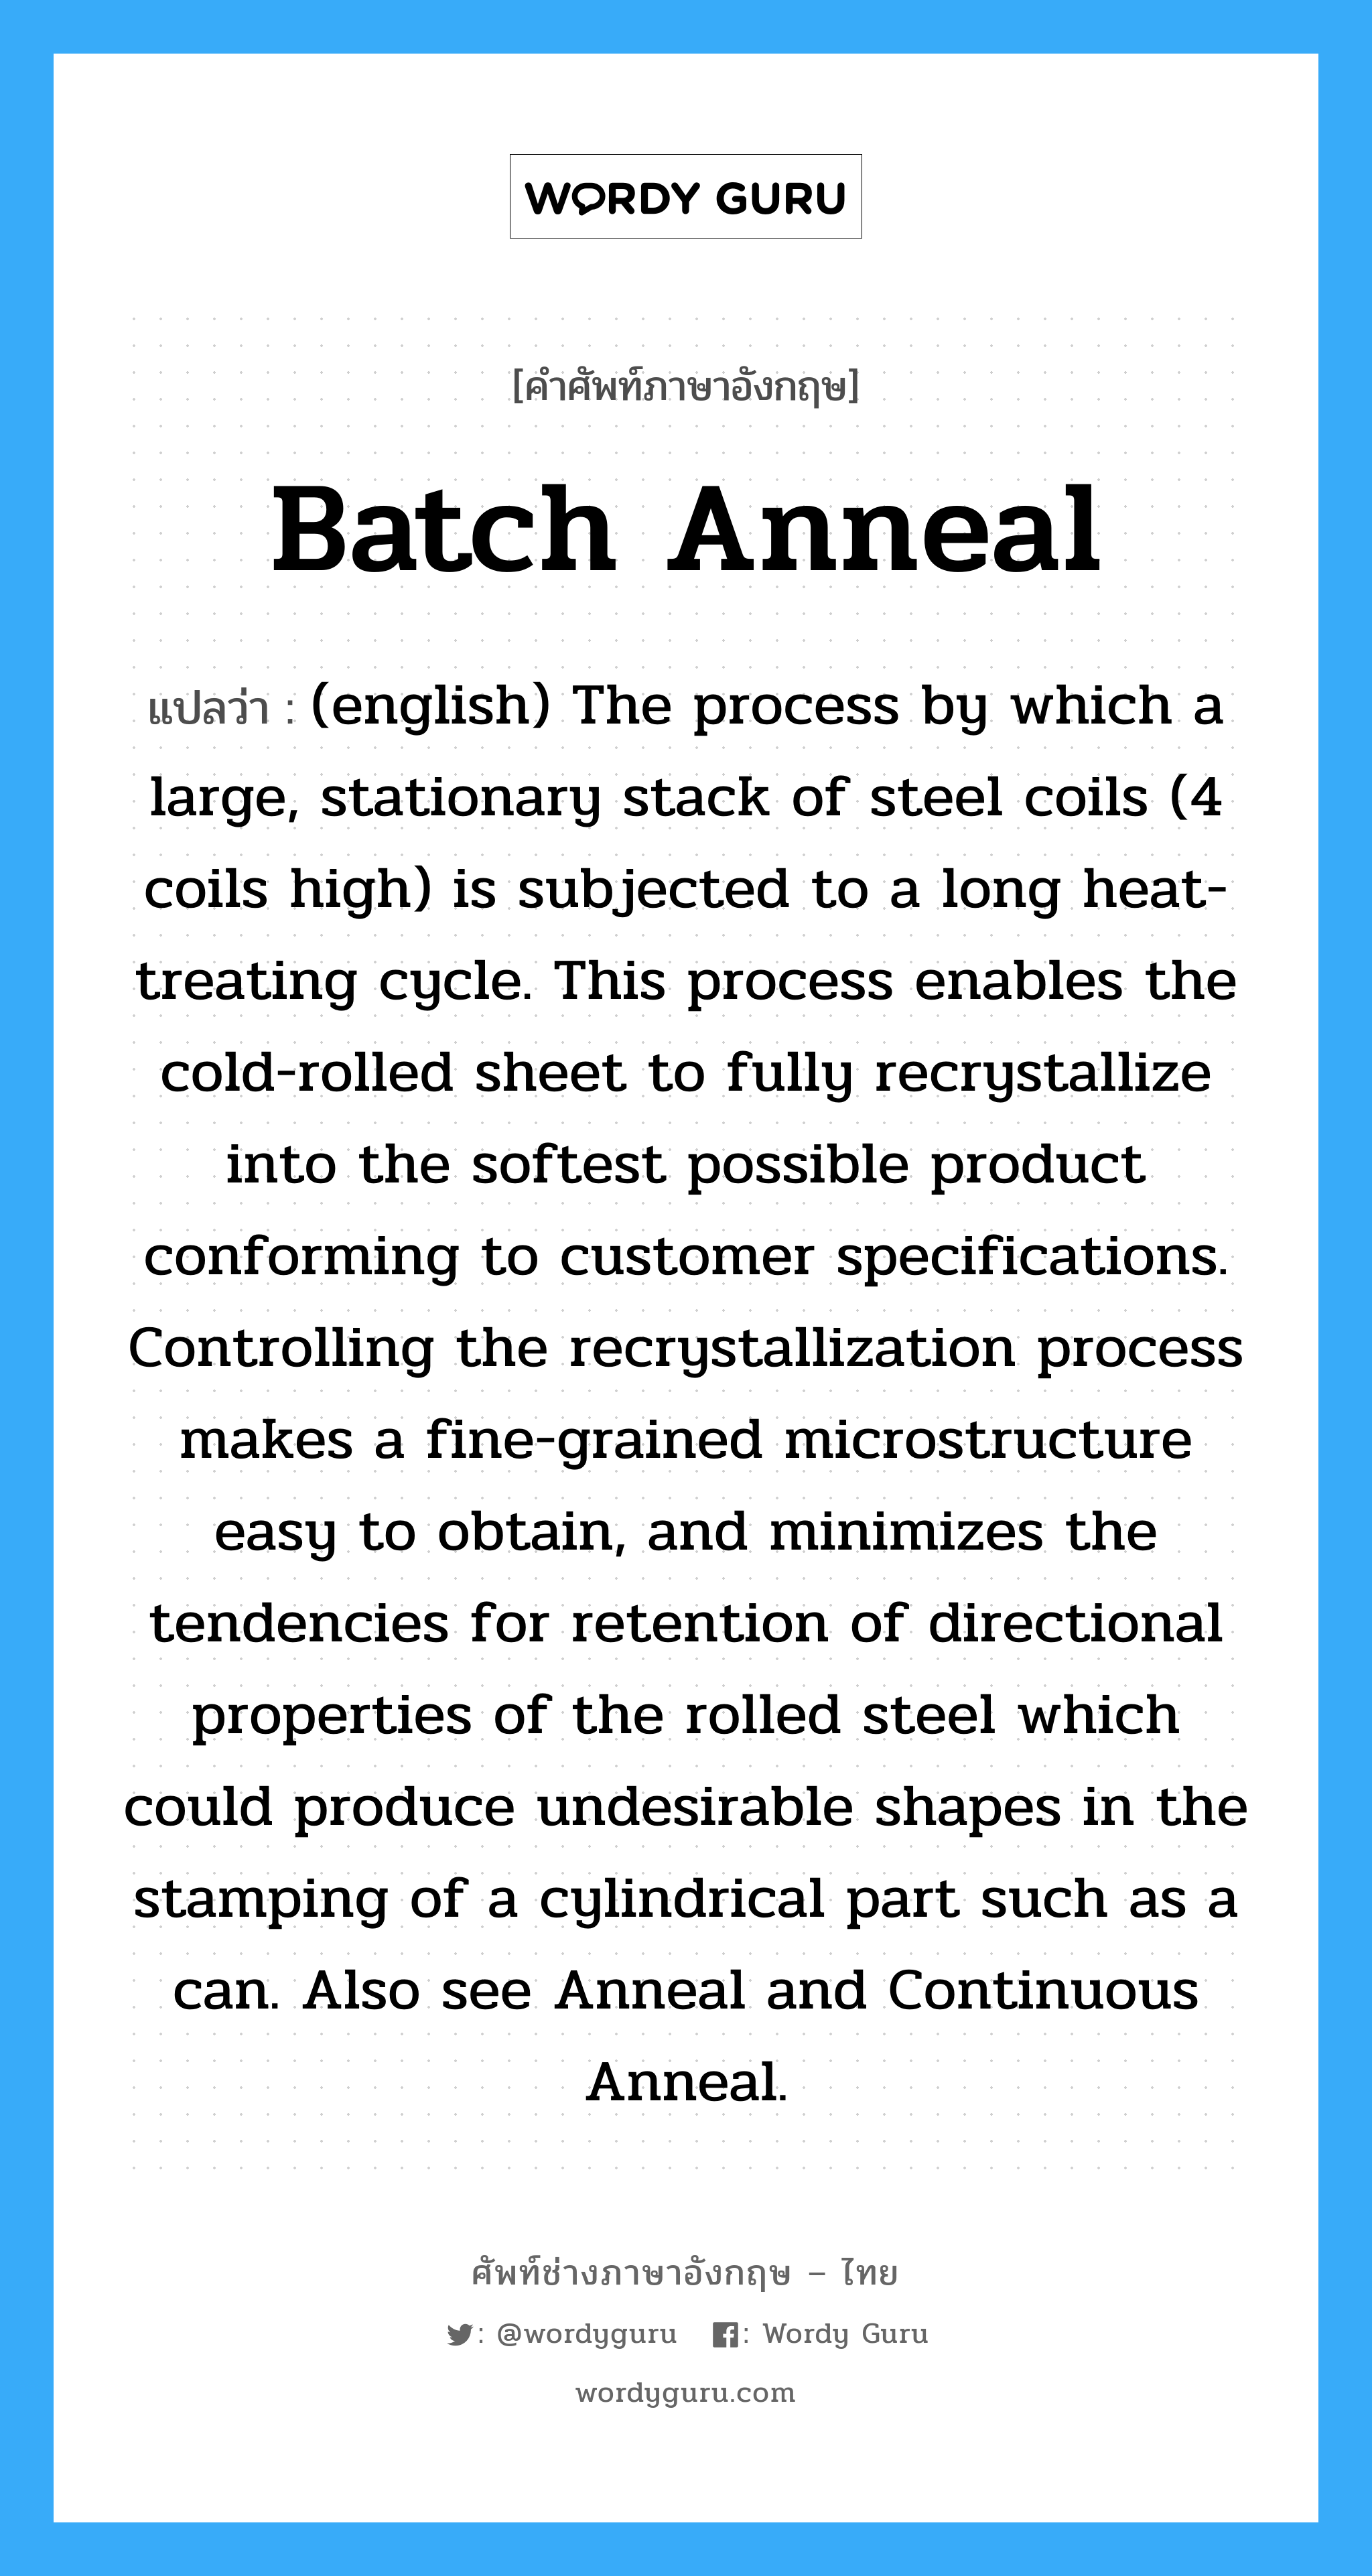 (english) The process by which a large, stationary stack of steel coils (4 coils high) is subjected to a long heat-treating cycle. This process enables the cold-rolled sheet to fully recrystallize into the softest possible product conforming to customer specifications. Controlling the recrystallization process makes a fine-grained microstructure easy to obtain, and minimizes the tendencies for retention of directional properties of the rolled steel which could produce undesirable shapes in the stamping of a cylindrical part such as a can. Also see Anneal and Continuous Anneal. ภาษาอังกฤษ?, คำศัพท์ช่างภาษาอังกฤษ - ไทย (english) The process by which a large, stationary stack of steel coils (4 coils high) is subjected to a long heat-treating cycle. This process enables the cold-rolled sheet to fully recrystallize into the softest possible product conforming to customer specifications. Controlling the recrystallization process makes a fine-grained microstructure easy to obtain, and minimizes the tendencies for retention of directional properties of the rolled steel which could produce undesirable shapes in the stamping of a cylindrical part such as a can. Also see Anneal and Continuous Anneal. คำศัพท์ภาษาอังกฤษ (english) The process by which a large, stationary stack of steel coils (4 coils high) is subjected to a long heat-treating cycle. This process enables the cold-rolled sheet to fully recrystallize into the softest possible product conforming to customer specifications. Controlling the recrystallization process makes a fine-grained microstructure easy to obtain, and minimizes the tendencies for retention of directional properties of the rolled steel which could produce undesirable shapes in the stamping of a cylindrical part such as a can. Also see Anneal and Continuous Anneal. แปลว่า Batch Anneal